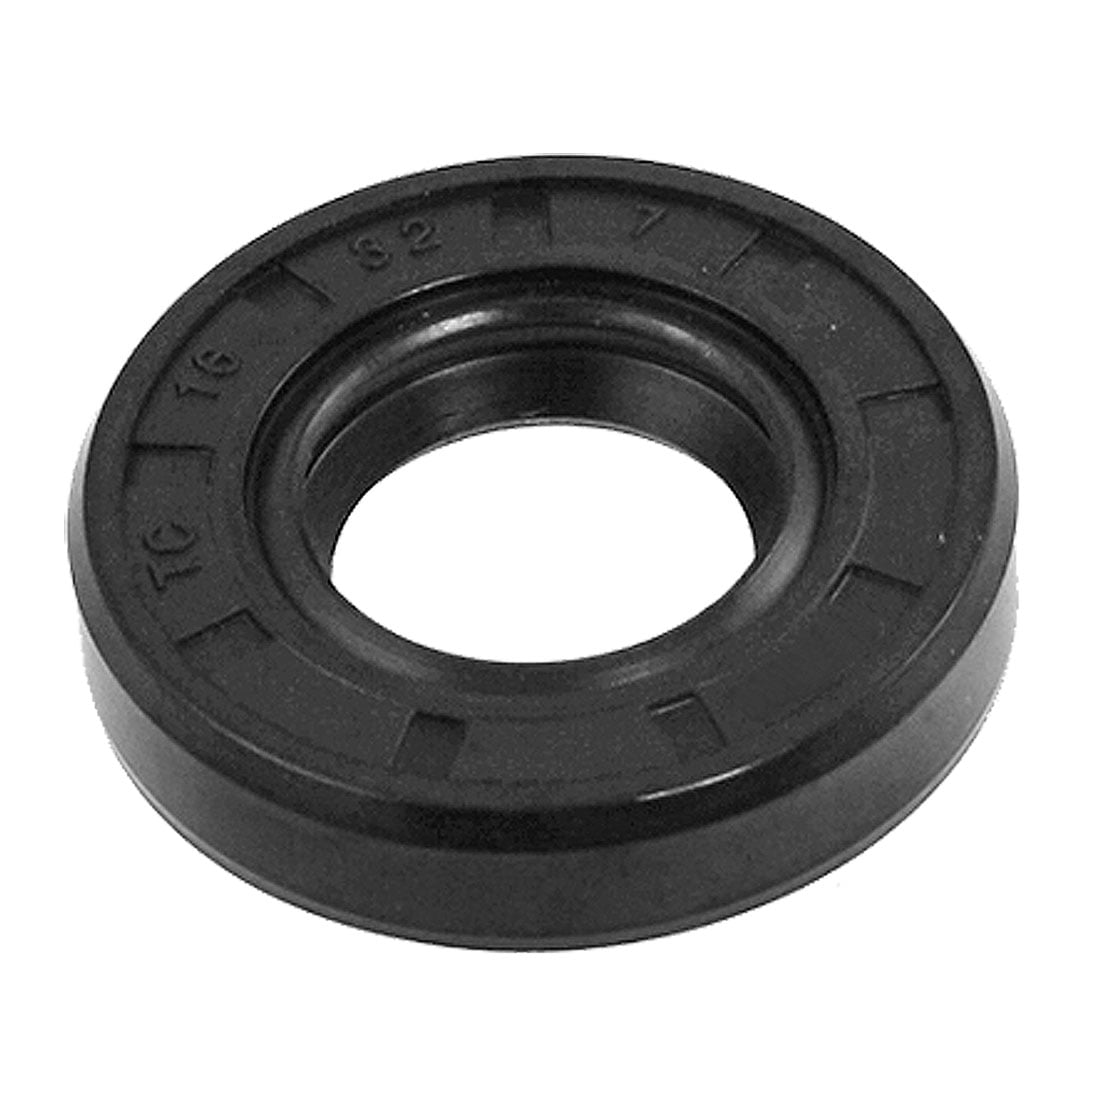 Metric Oil Shaft Seal 19 x 30 x 7mm Double Lip  Price for 1 pc 